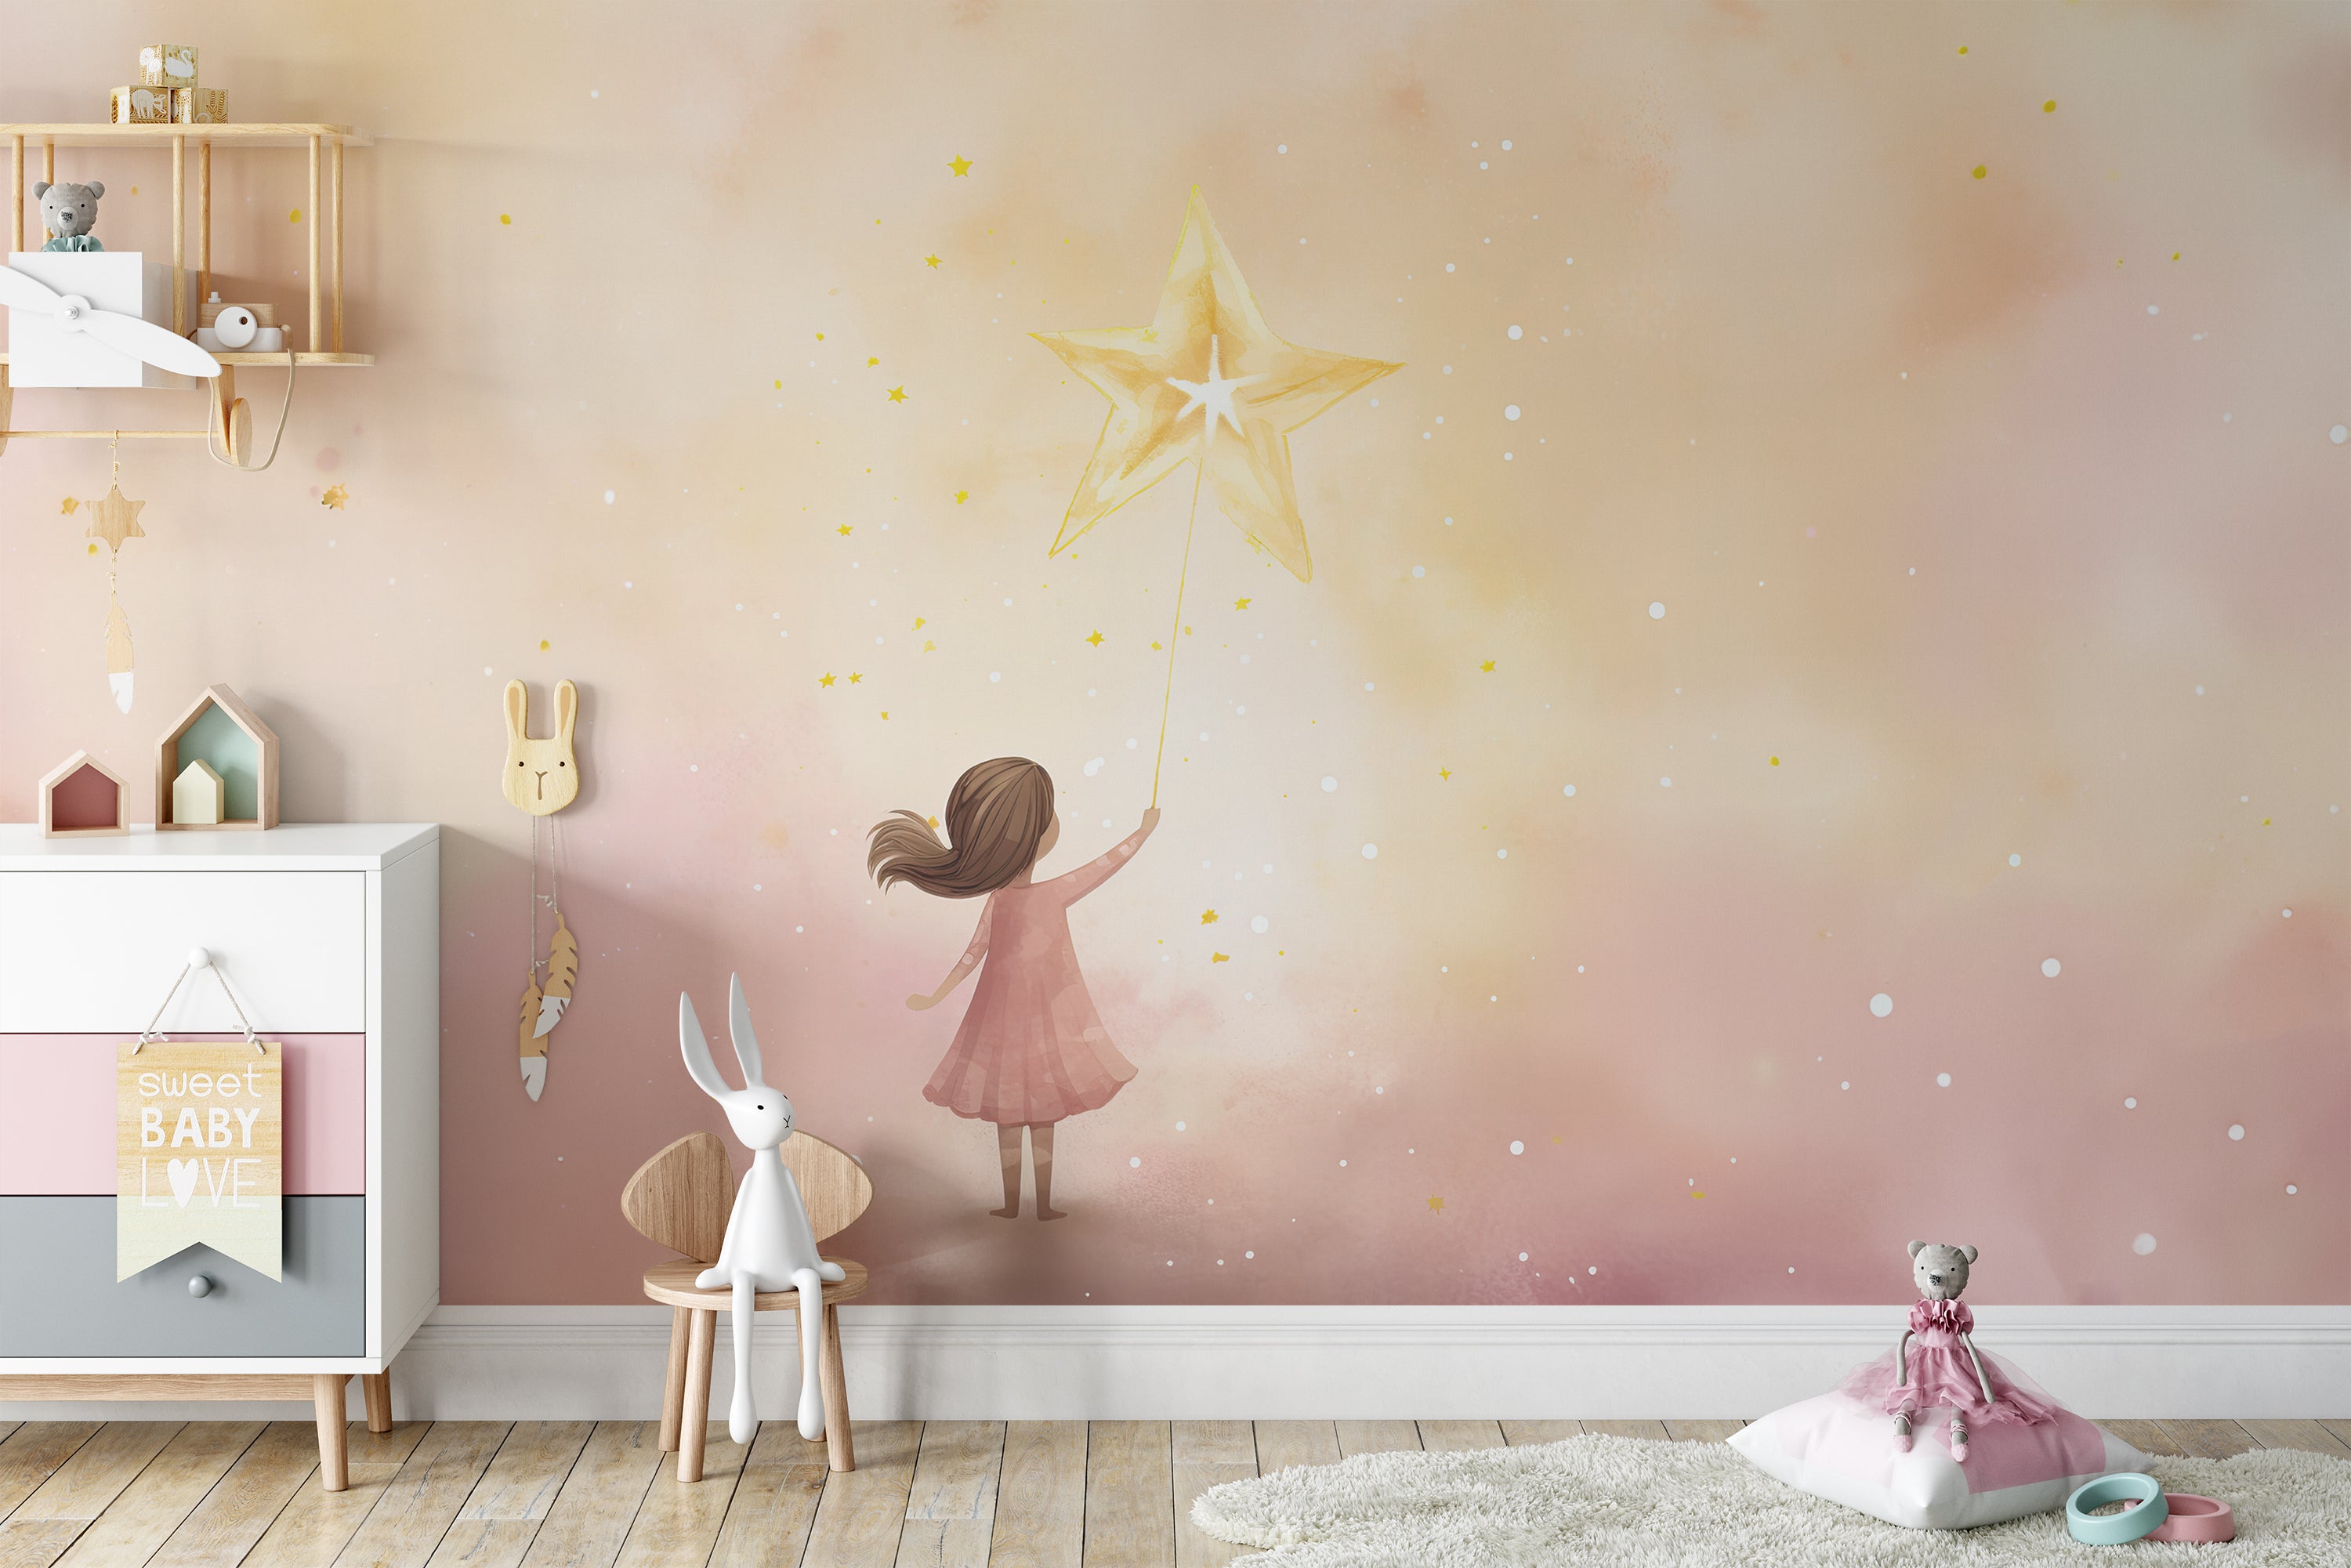 Child reaching for a glowing star in the 'My Guiding Star Mural' on a dreamy pastel background.